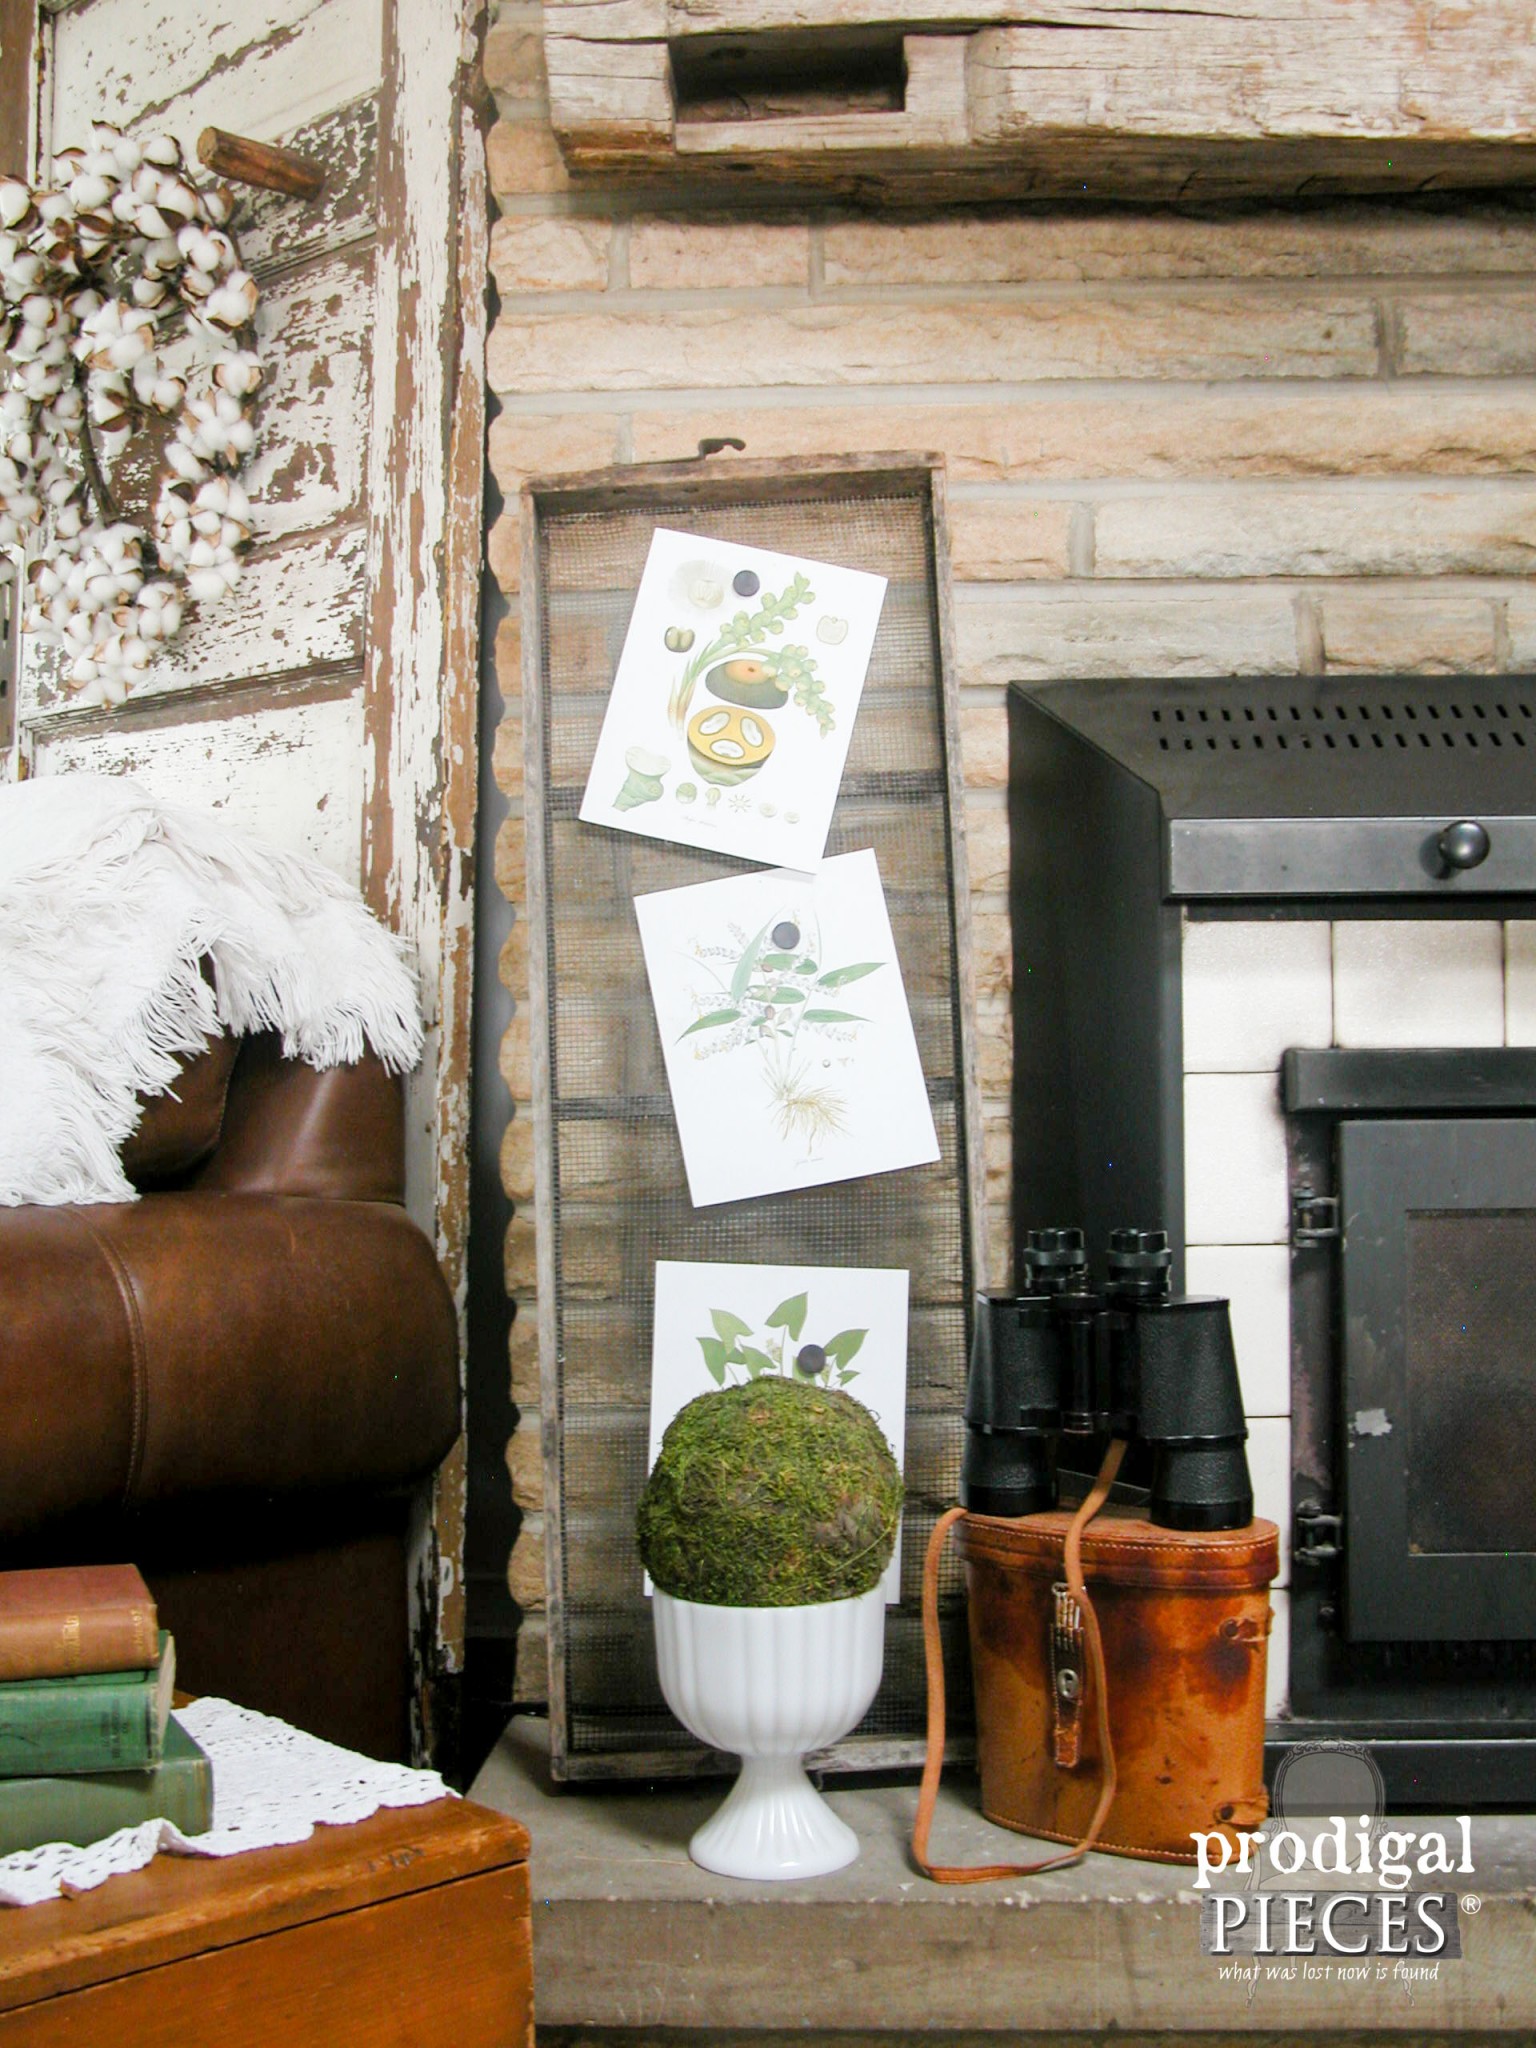 Botanical Print Display on Antique Farmhouse Sifter by Prodigal Pieces | www.prodigalpieces.com